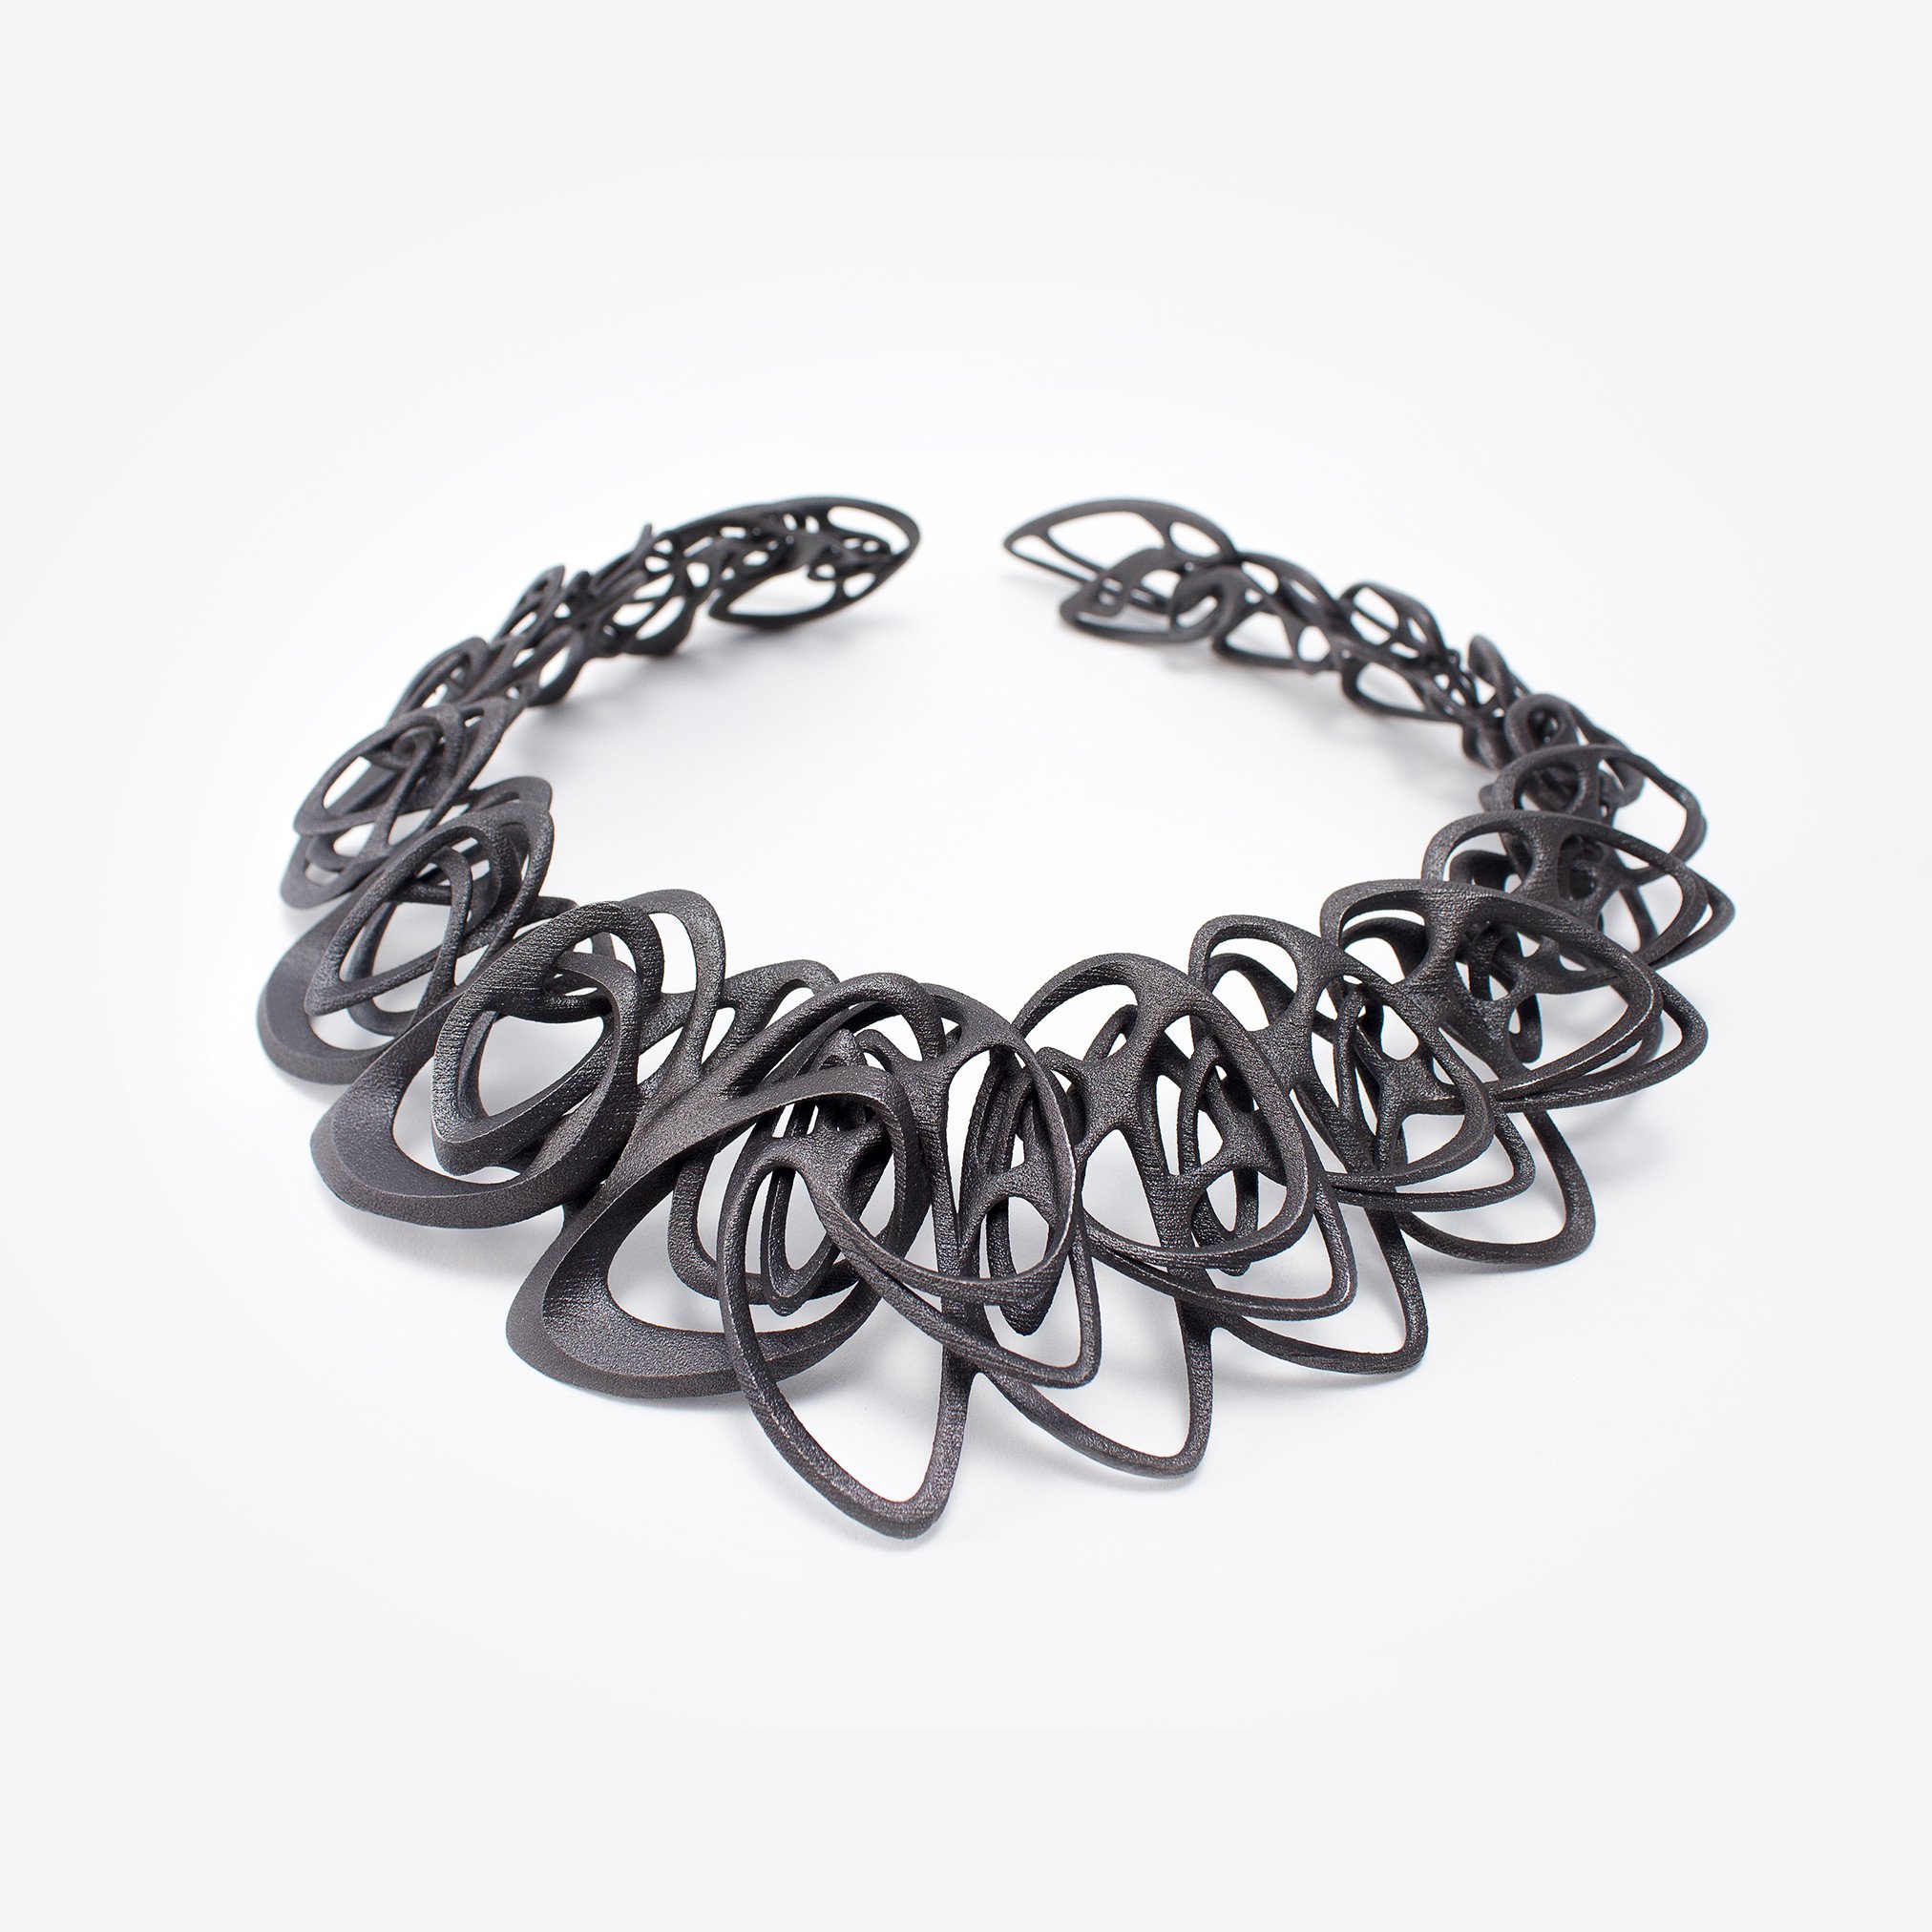 The necklace was 3D printed in steel using ExOne’s binder jetting technology.